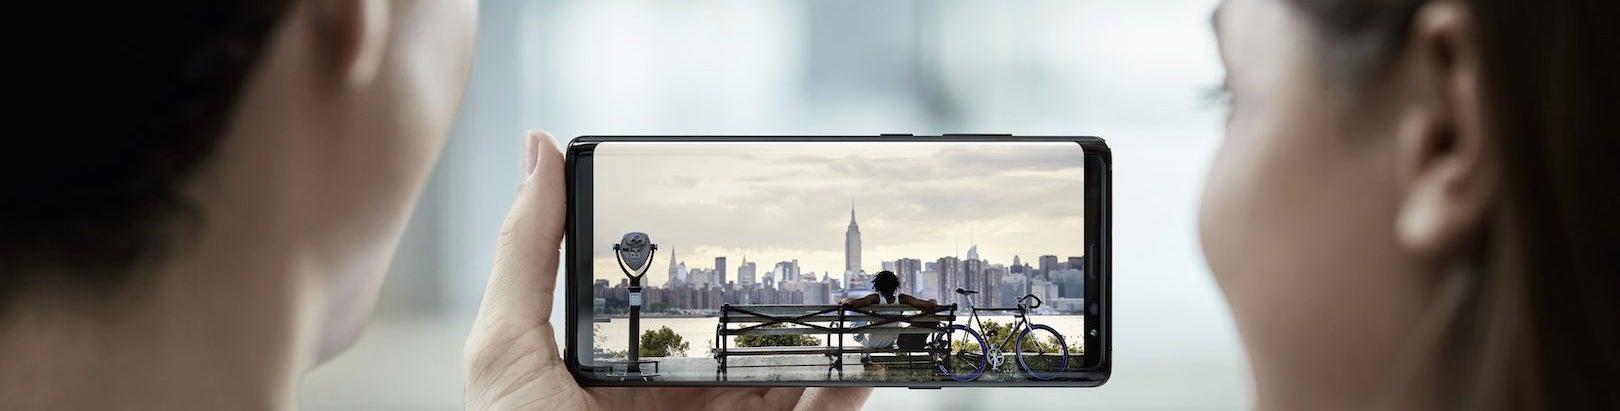 Image for Samsung Galaxy Note 8 review